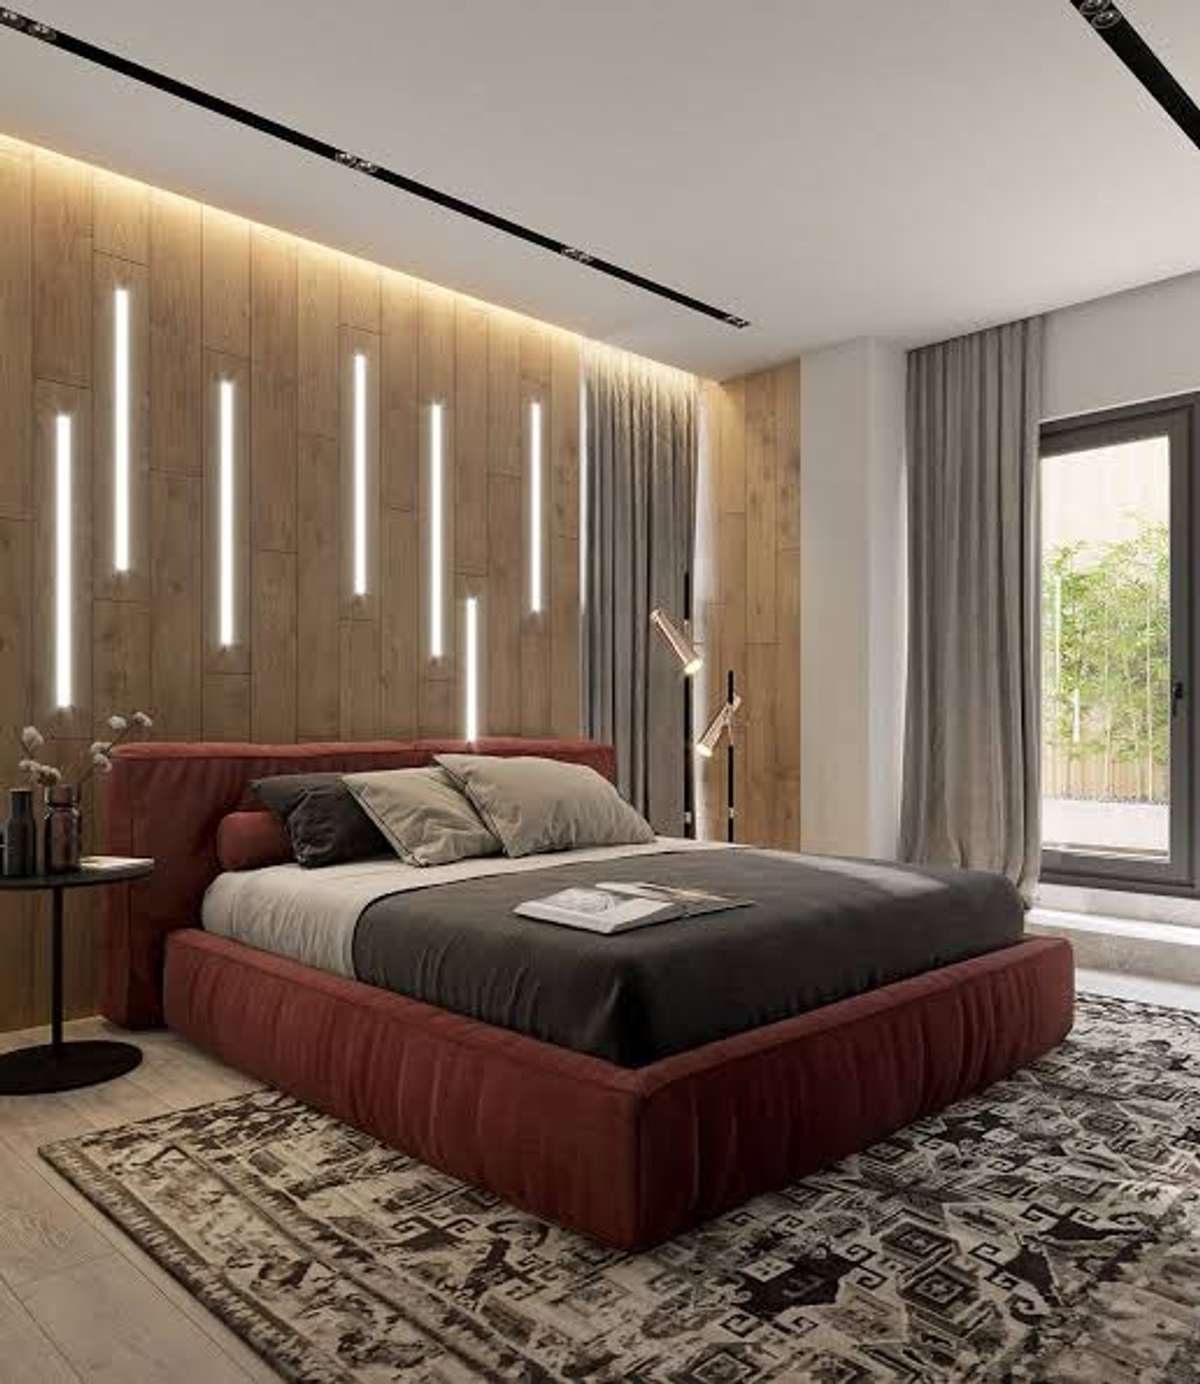 Furniture, Storage, Bedroom Designs by Architect CONCEPTAVE DESIGNS INTERIORS, Ghaziabad | Kolo